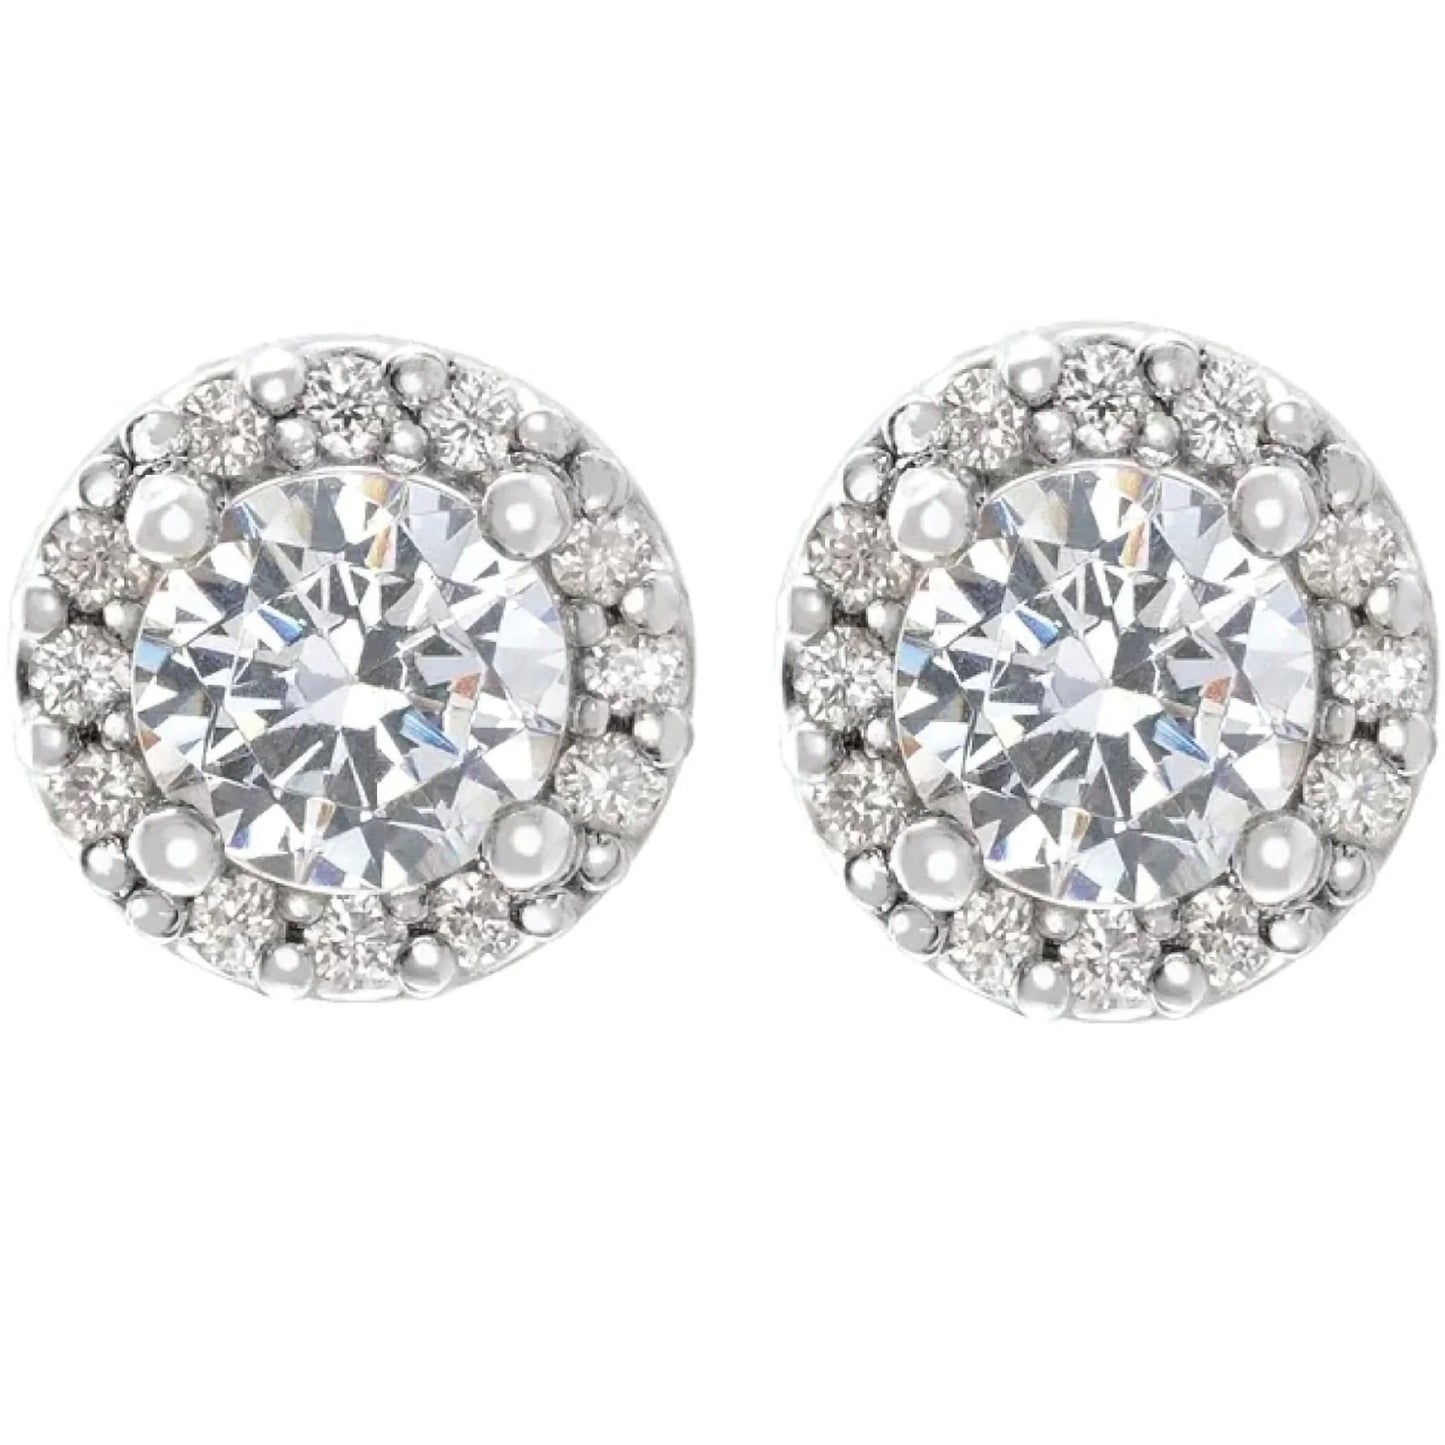 Halo-Styled Natural Diamond Stud Earrings 3.50 Carats White Gold 14K